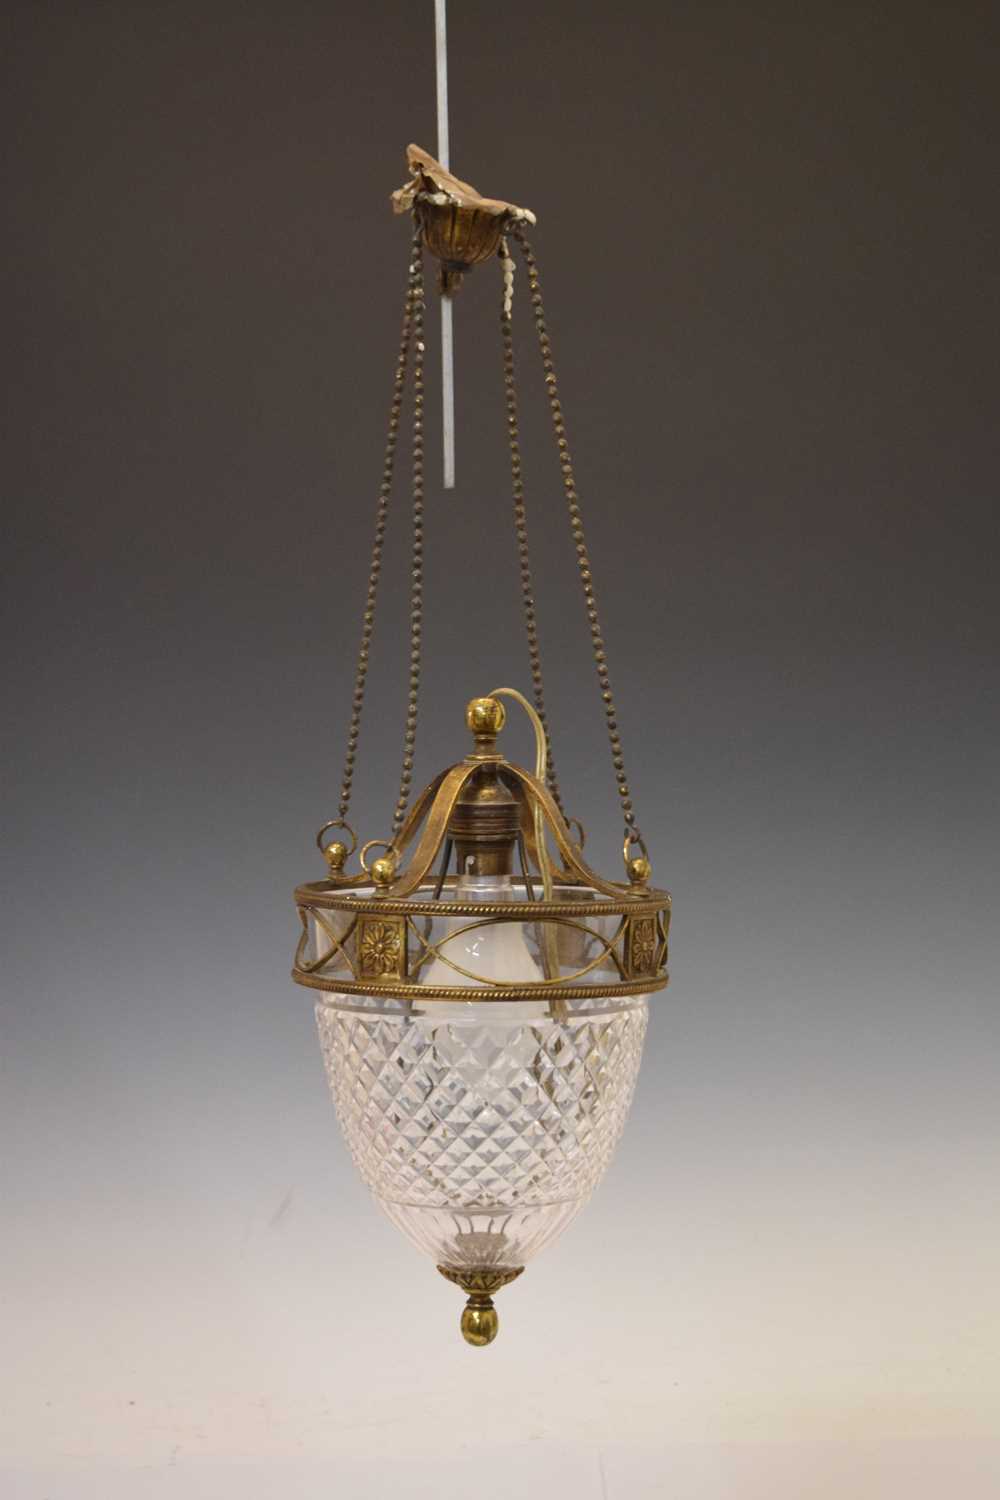 20th century cut glass and gilt metal ceiling light - Image 2 of 8